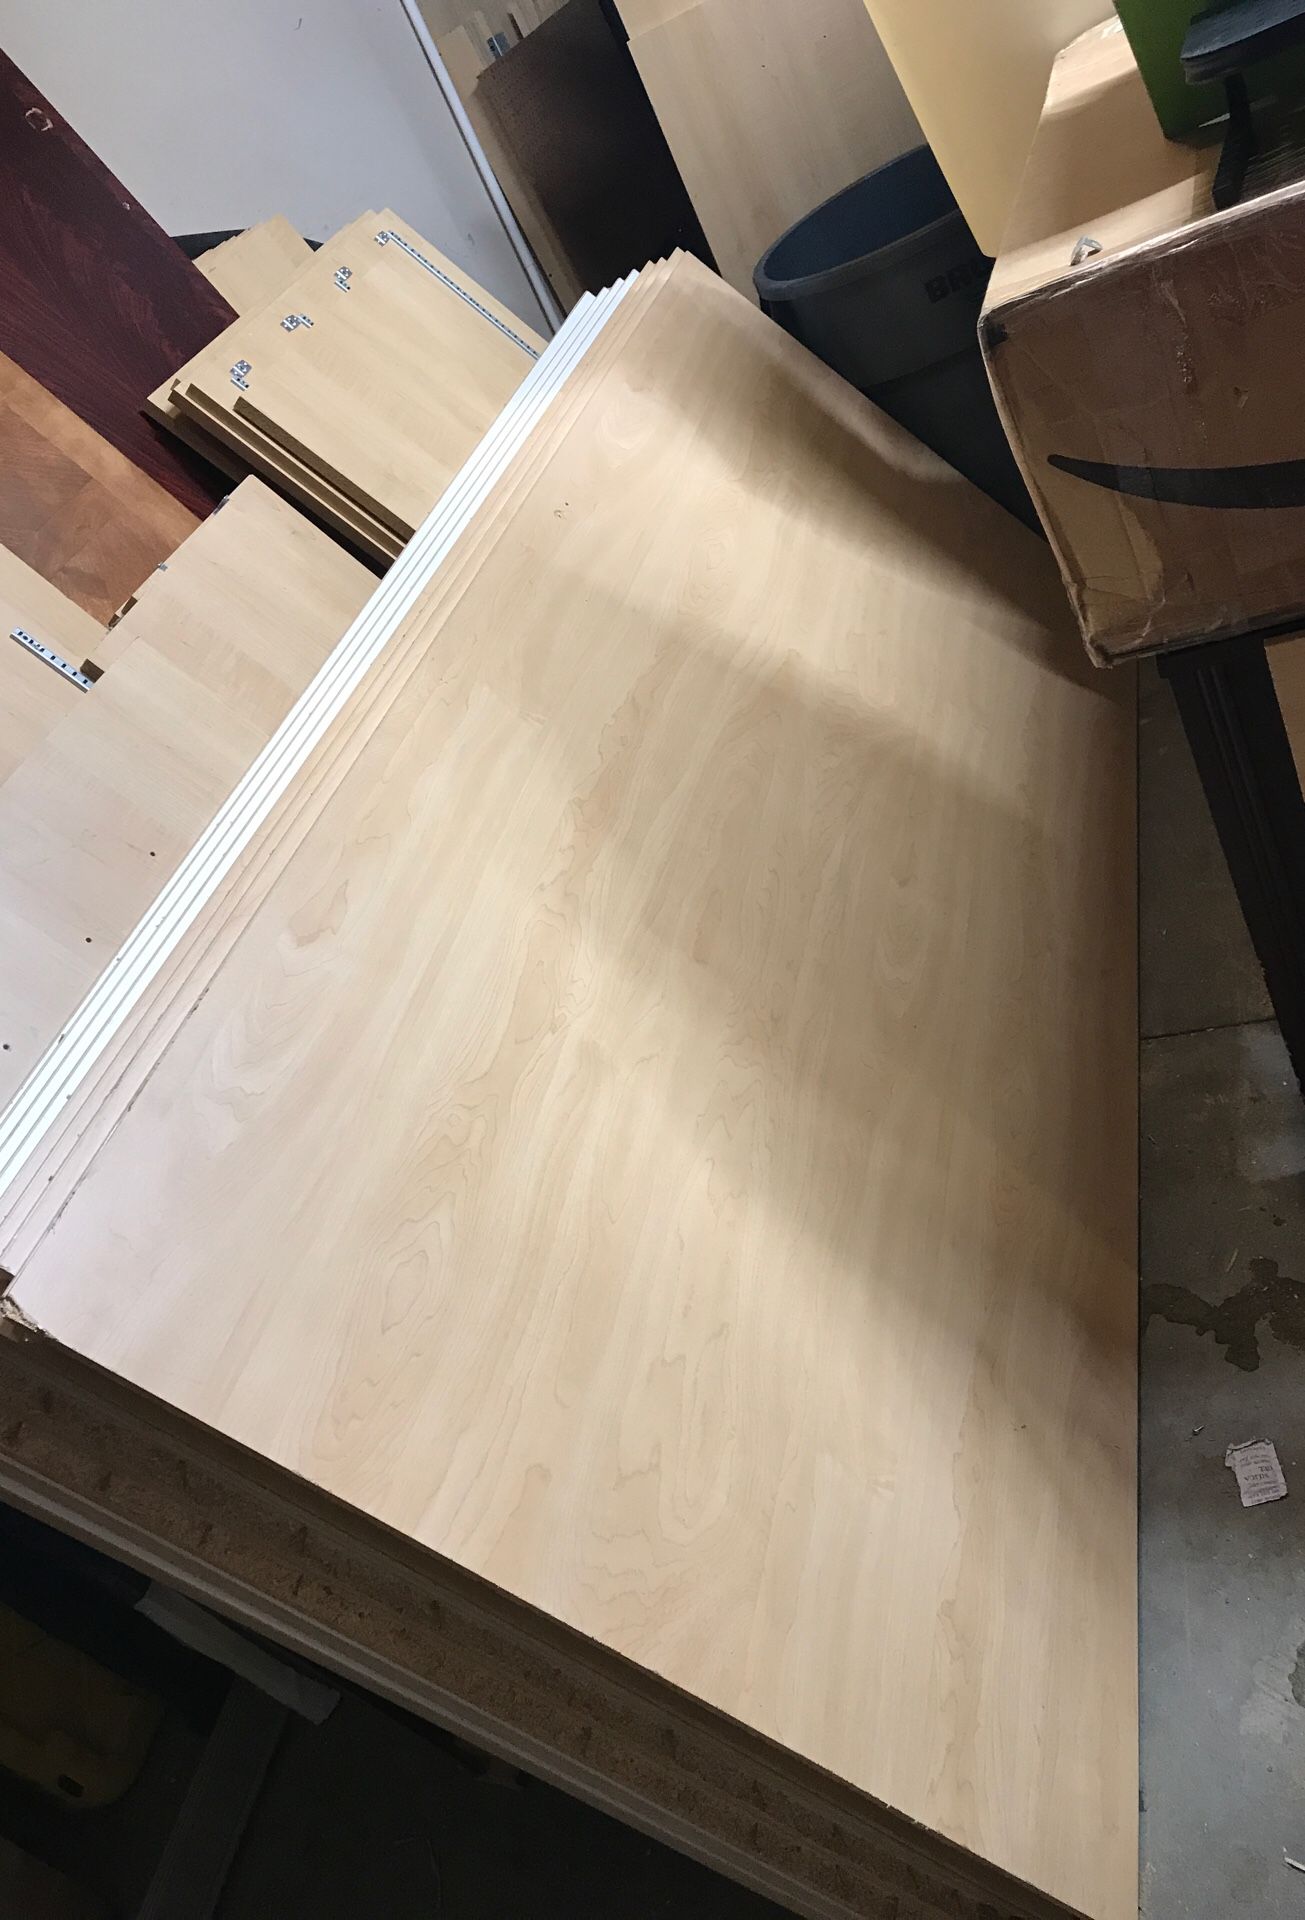 Furniture boards 41”by 87”